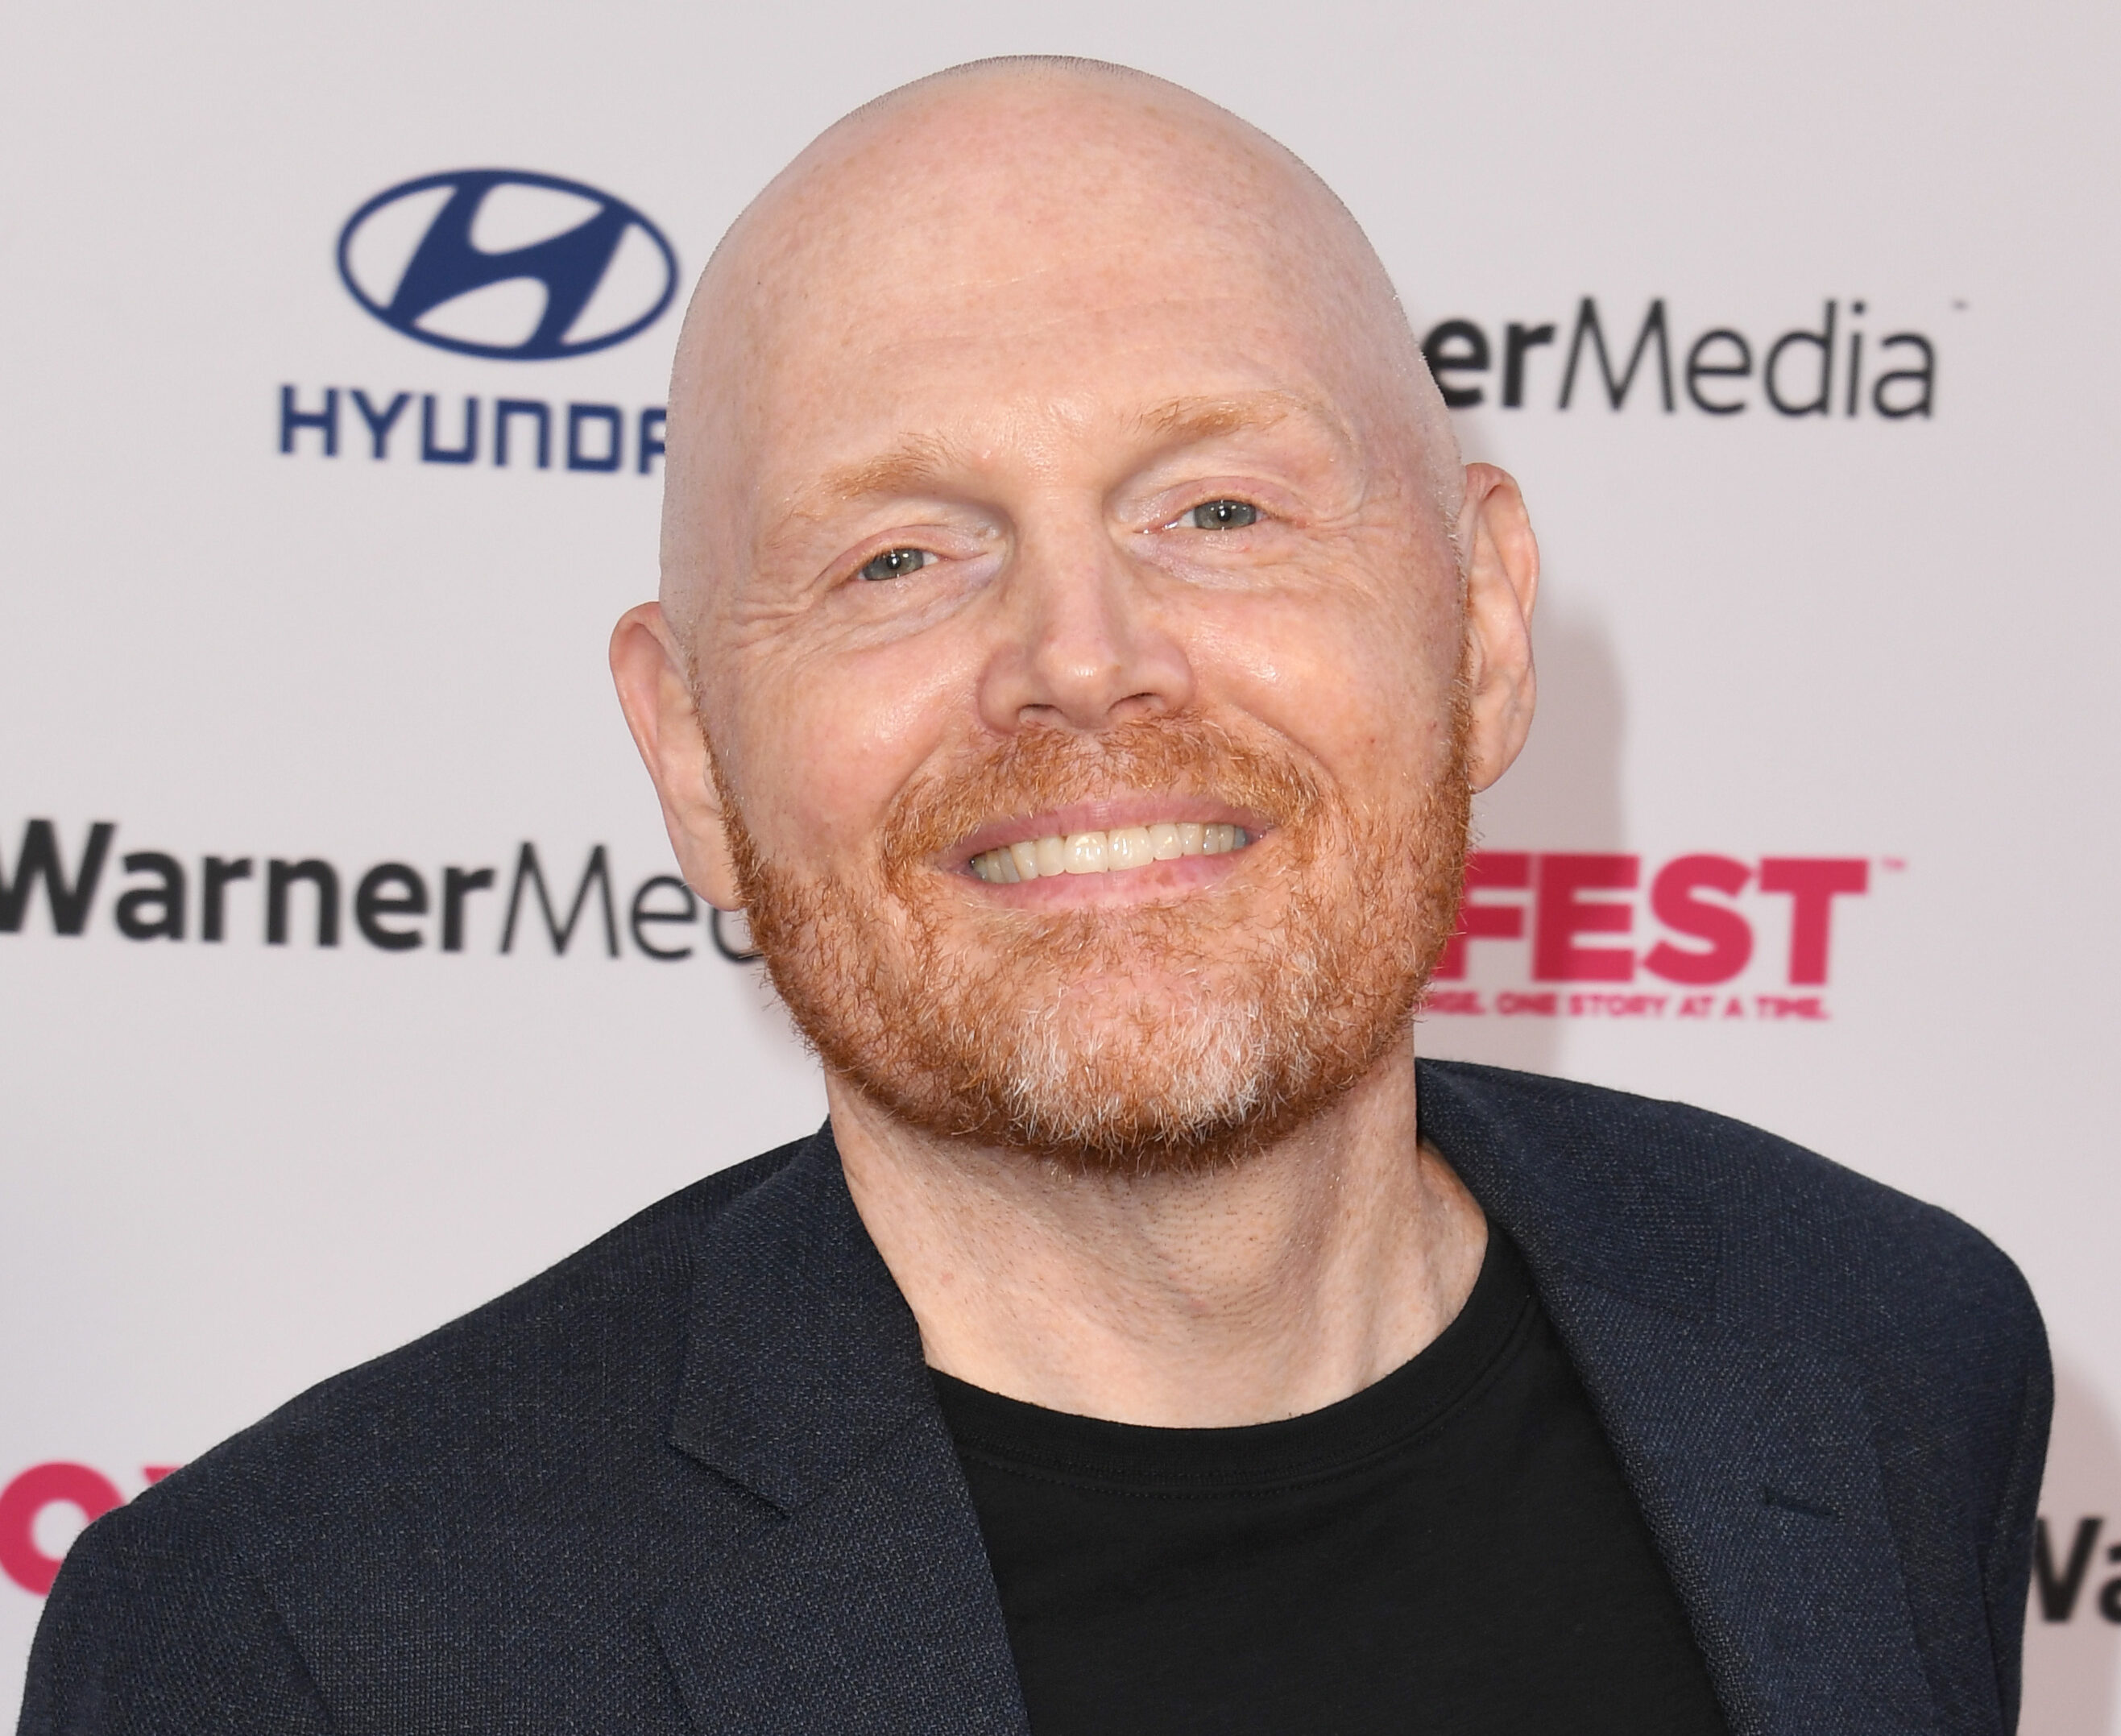 Bill Burr teams up with BetMGM in new podcast partnership | EGR | B2B information for the gambling and gaming industry